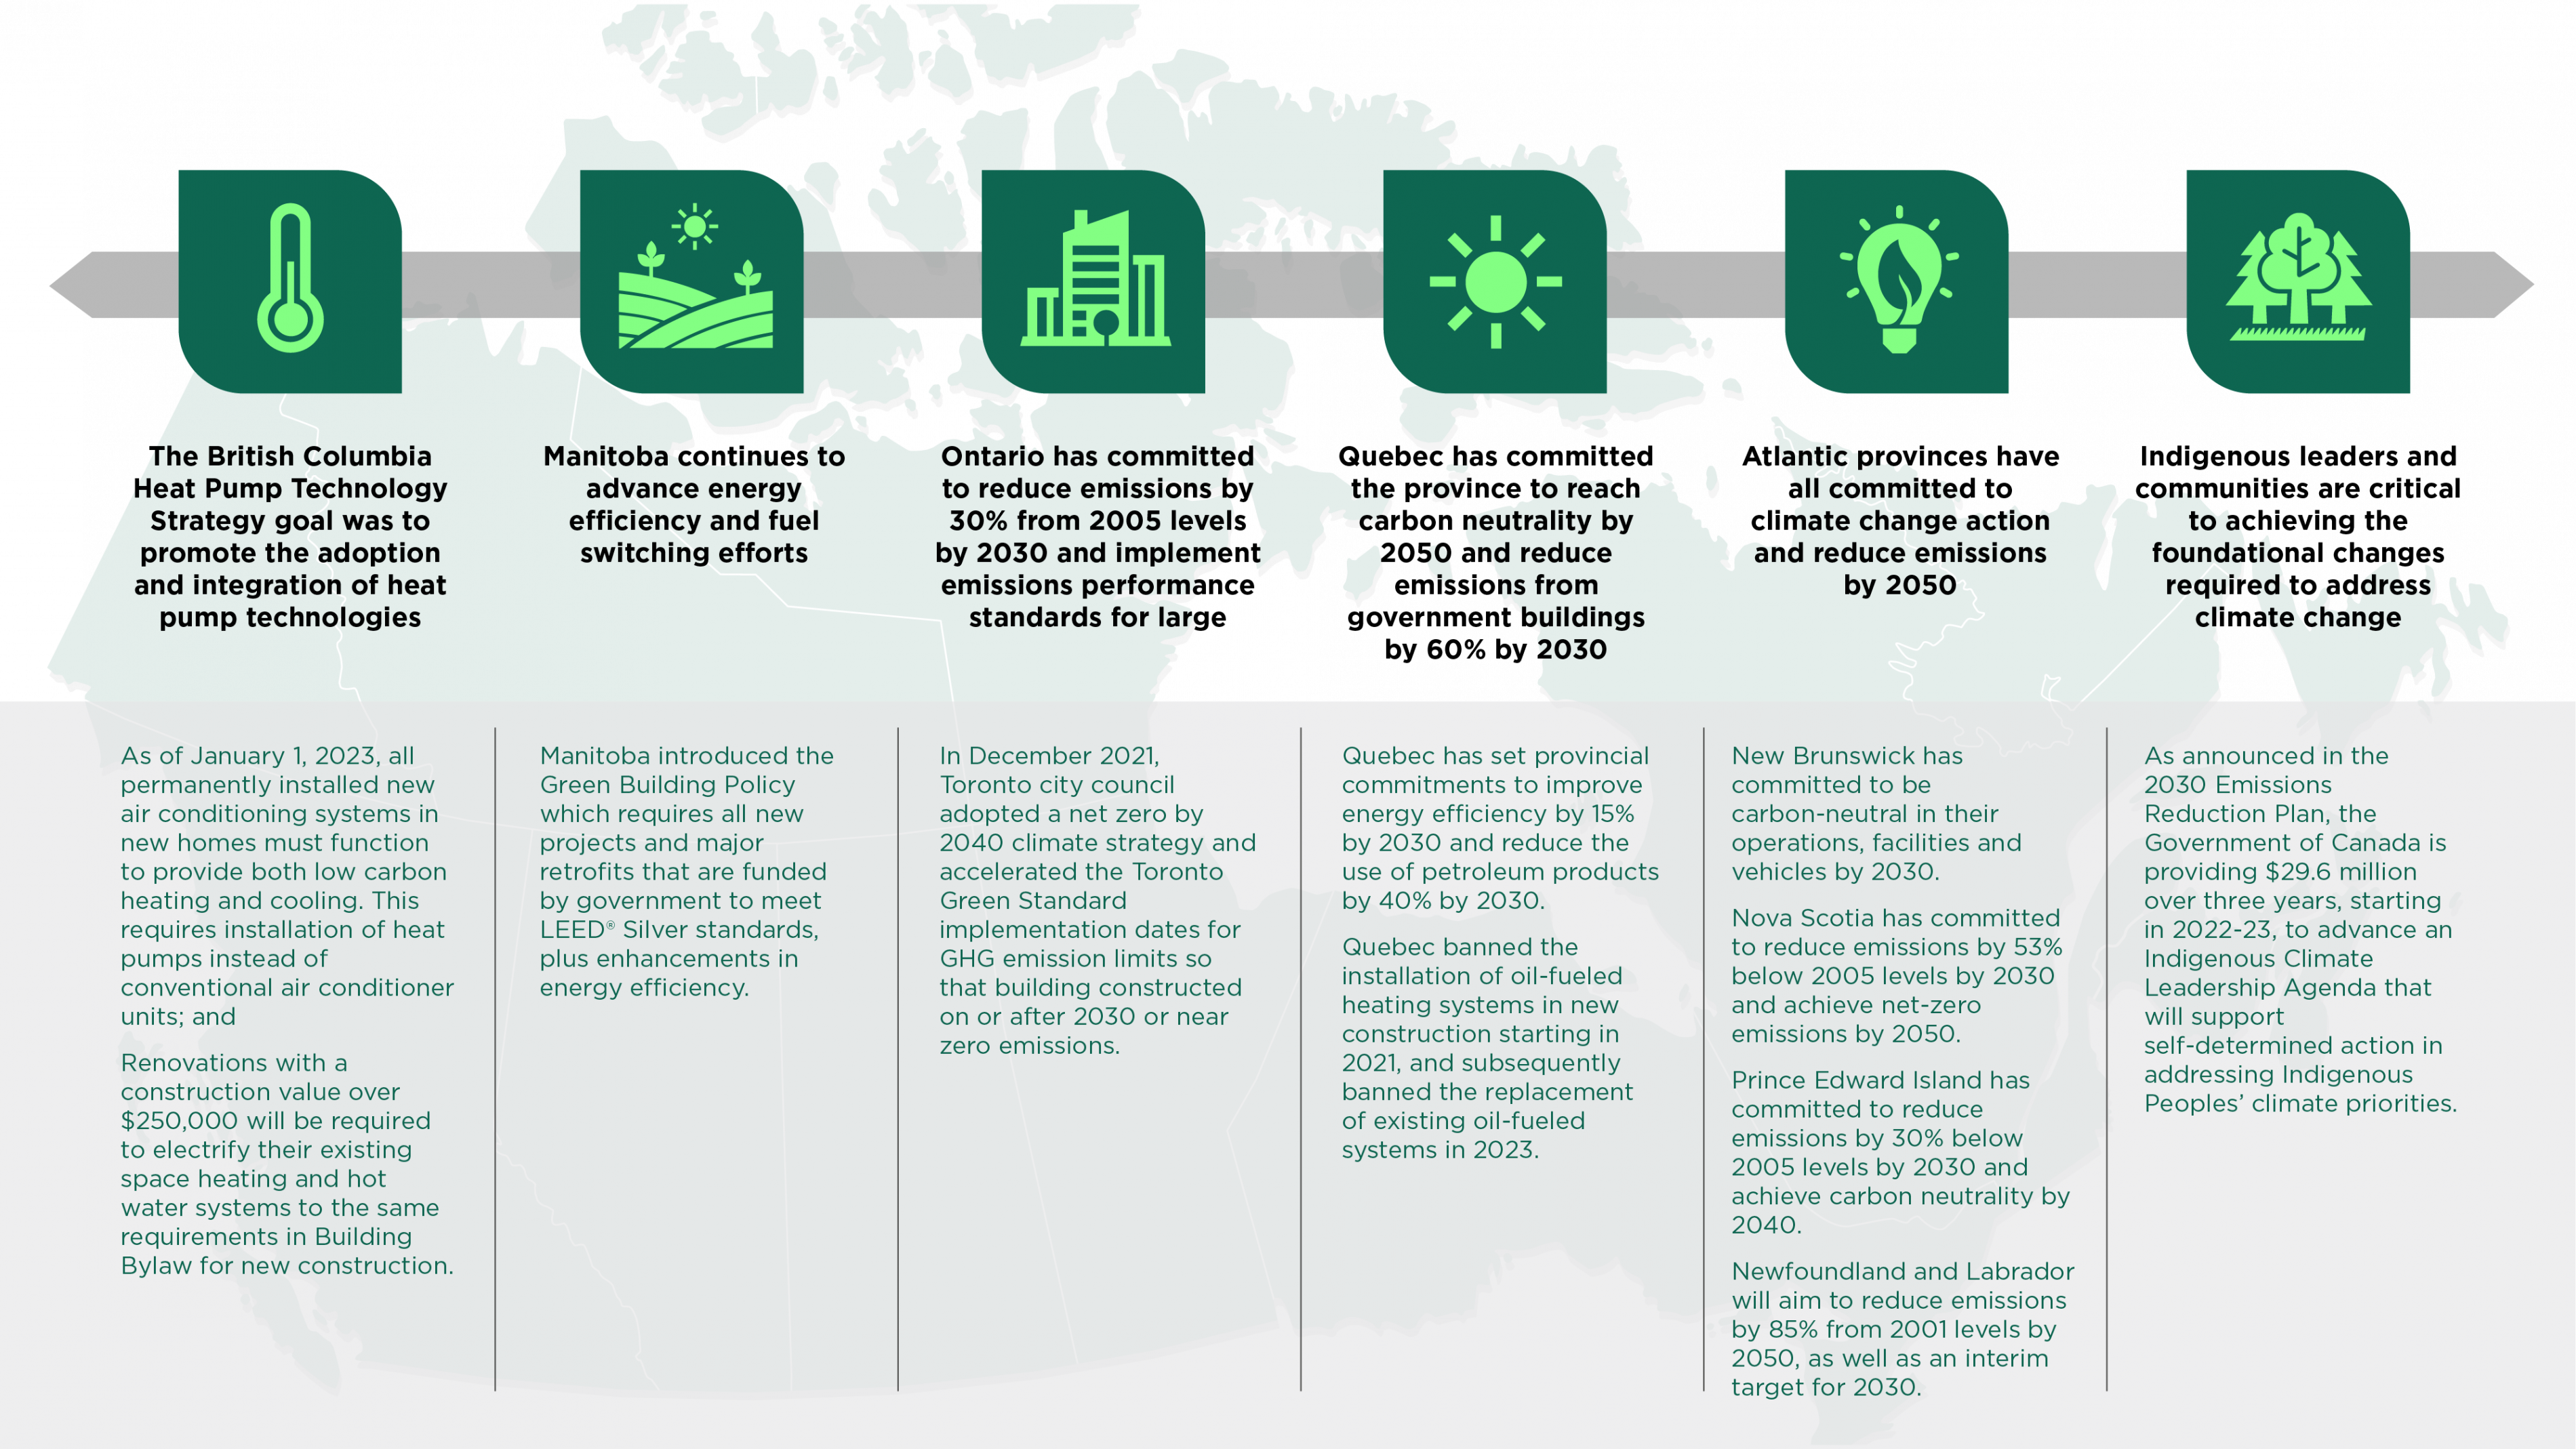 Infographic to illustrate selected examples of climate leadership and innovation across different regions of Canada.